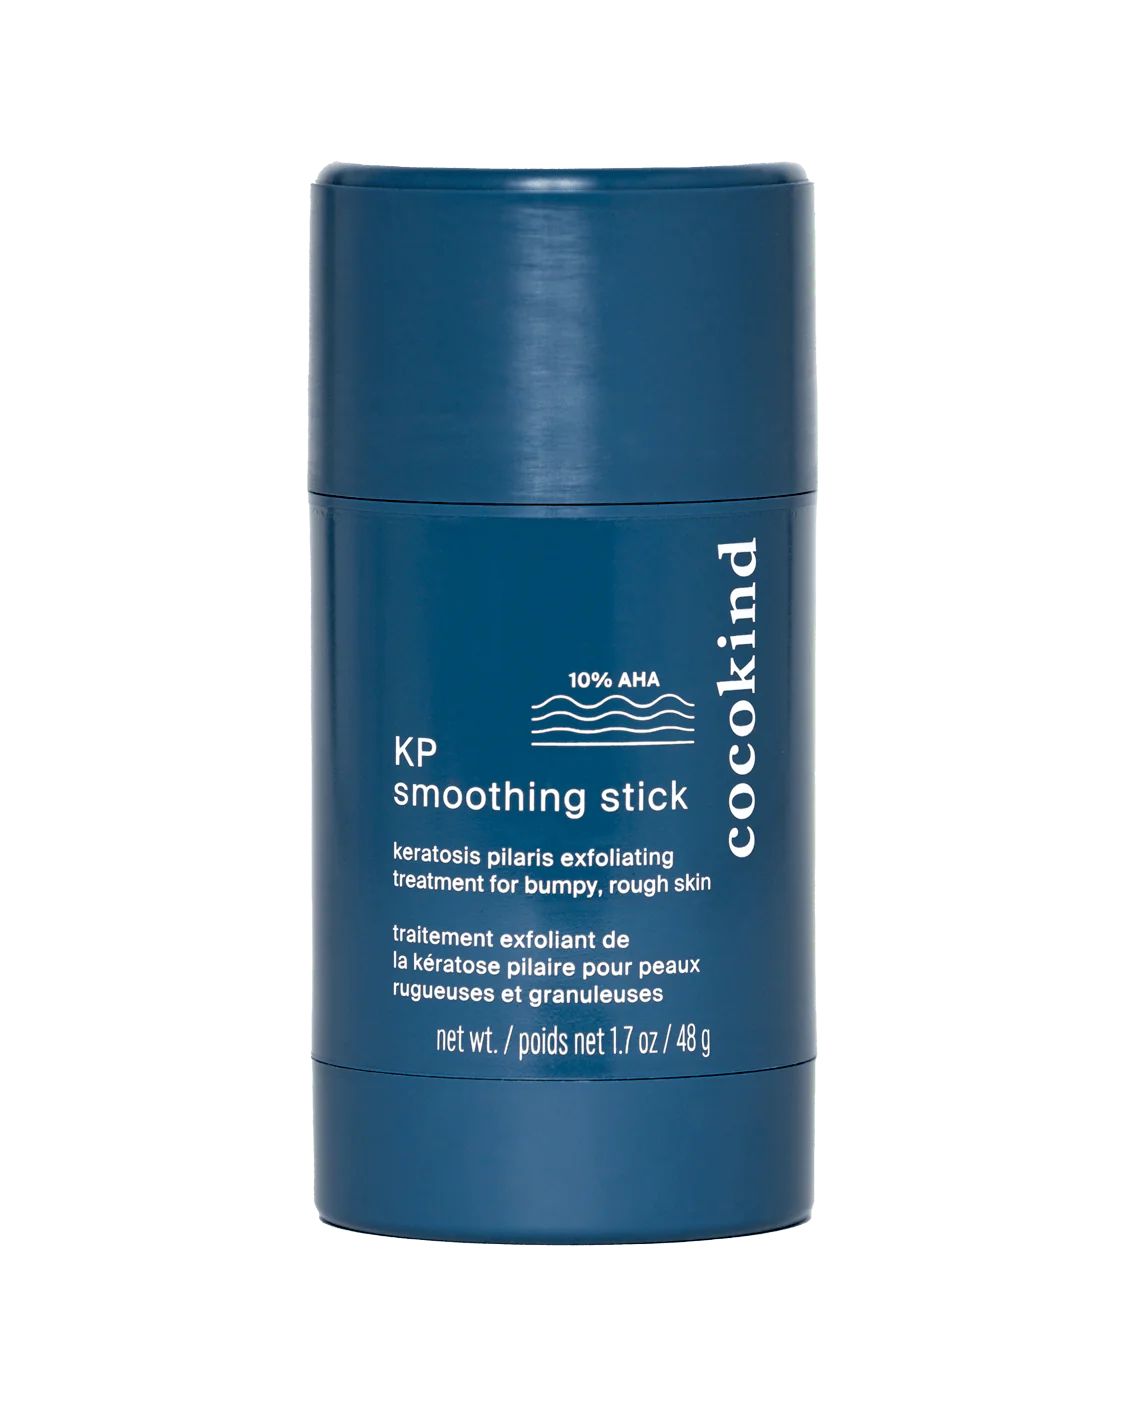 KP smoothing stick | Cocokind